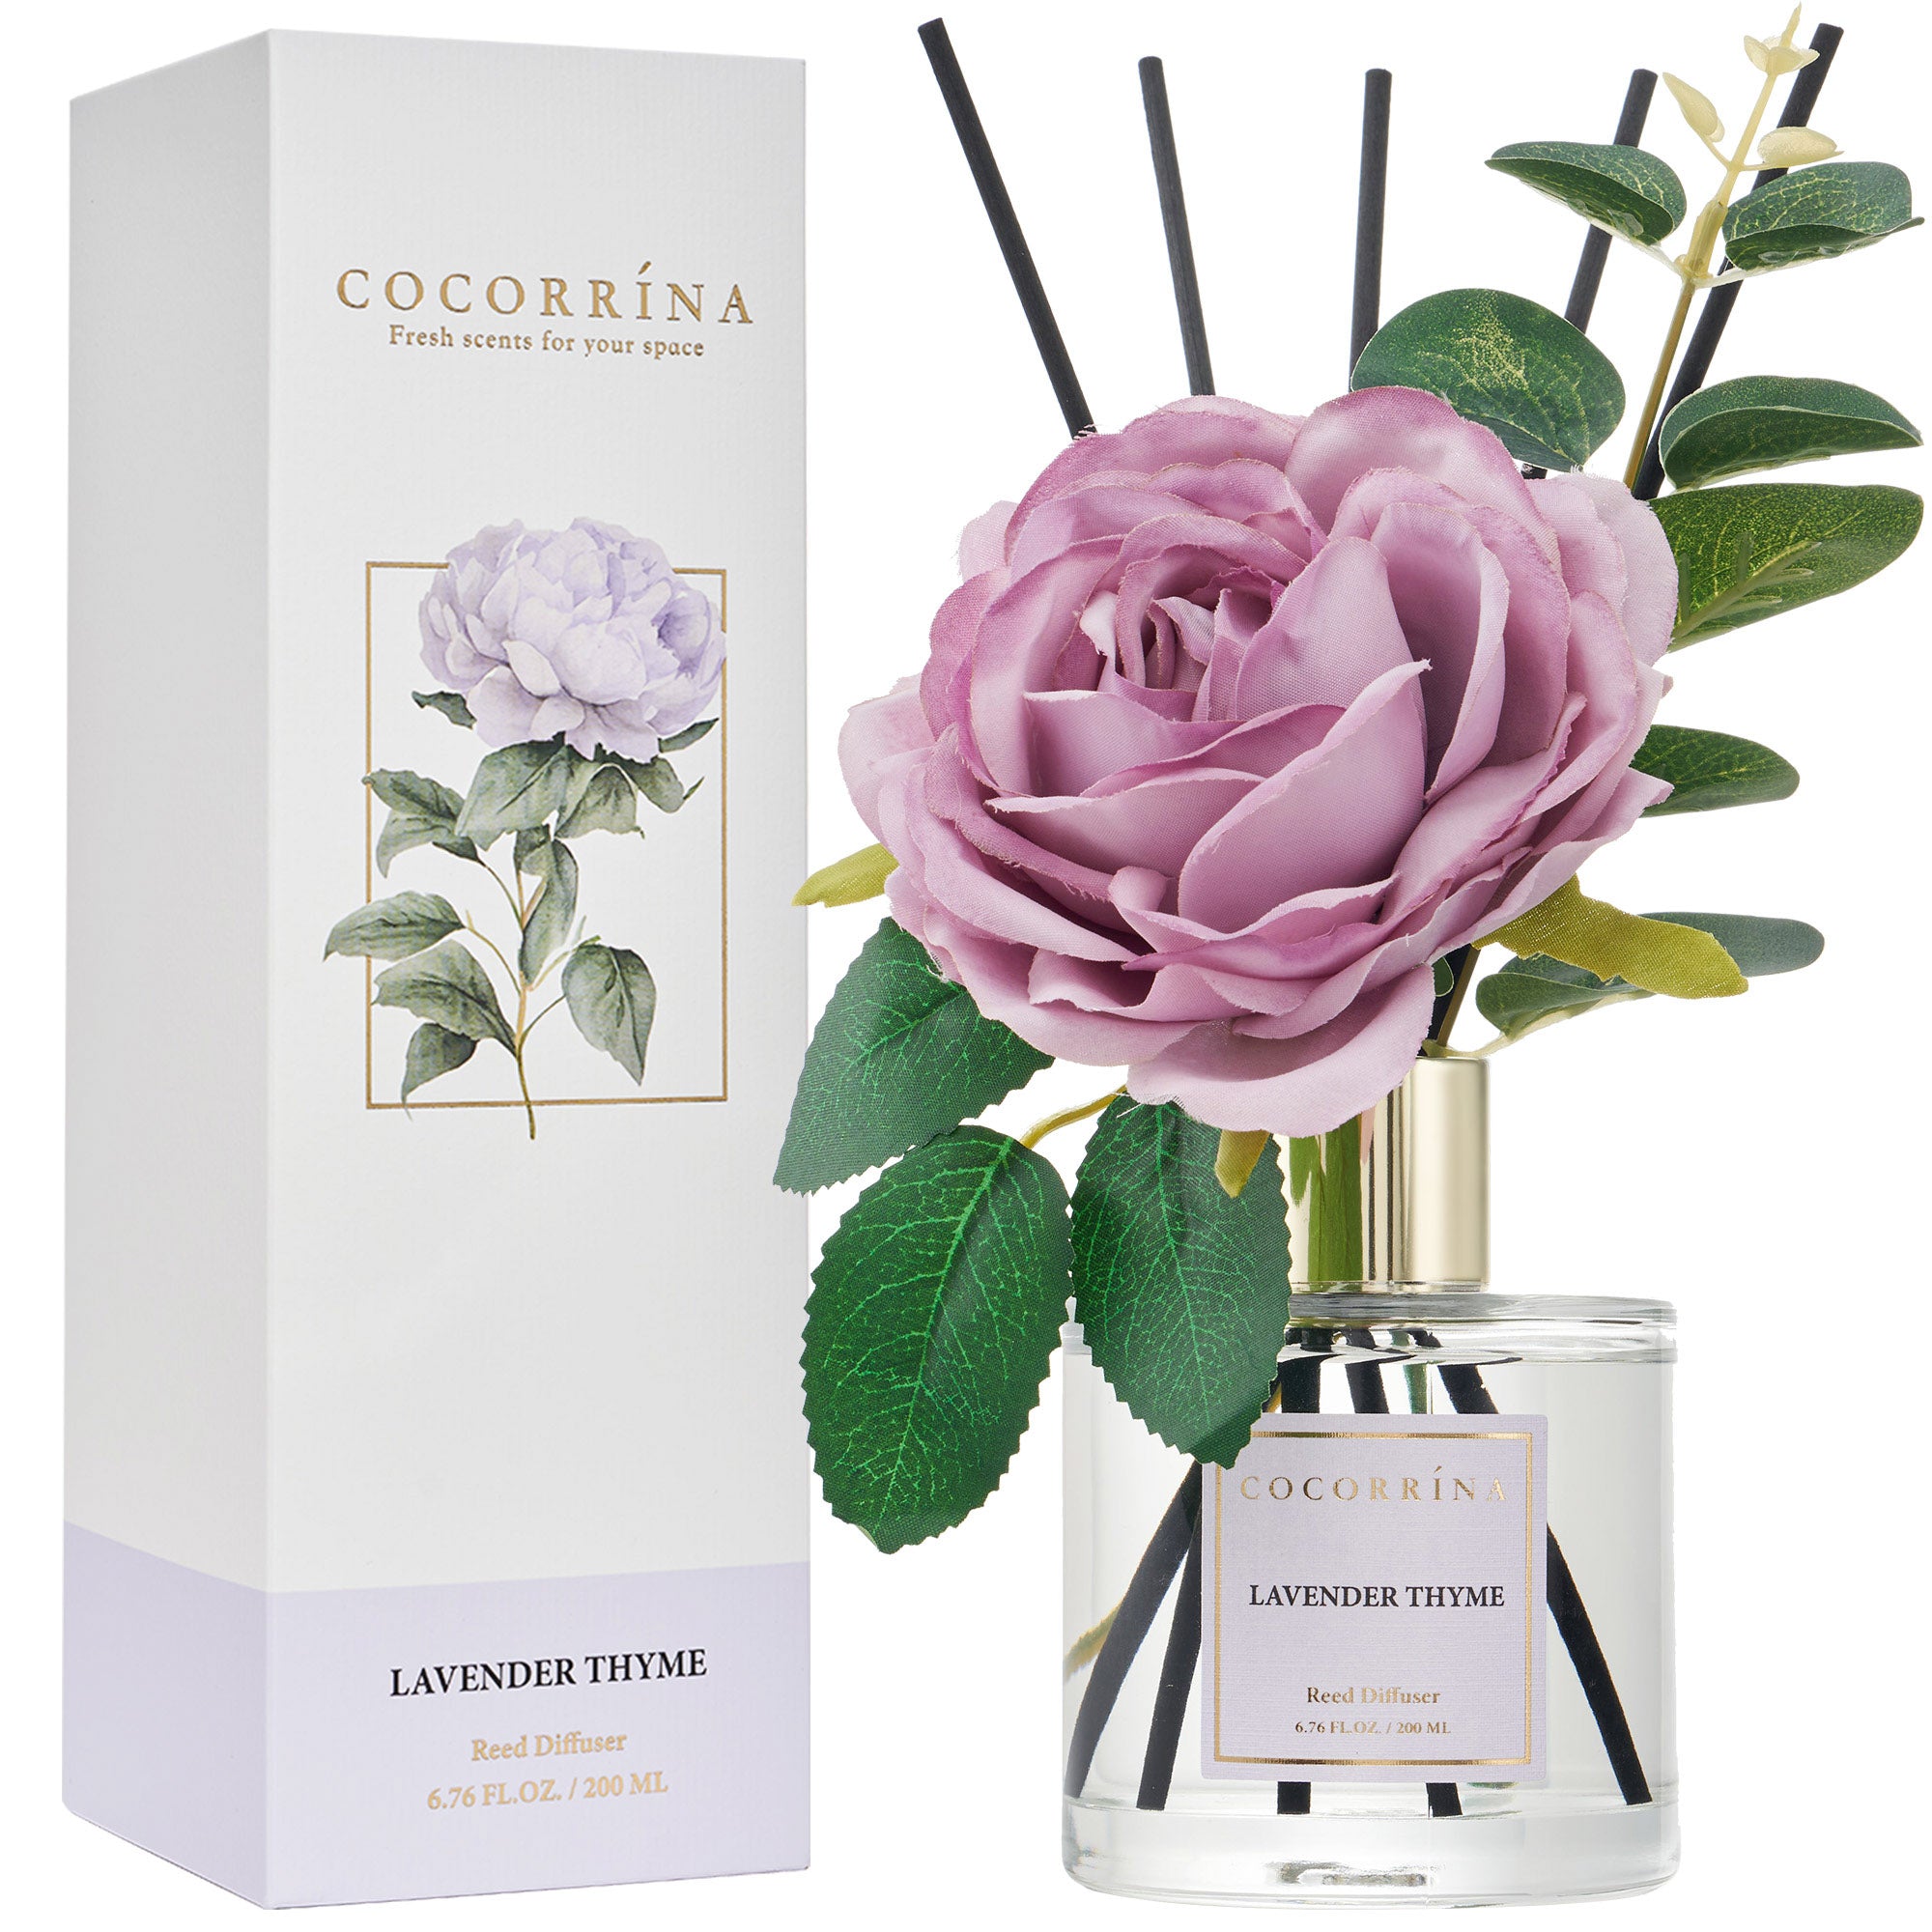 COCORRÍNA Lavender Thyme Flower Reed Diffuser